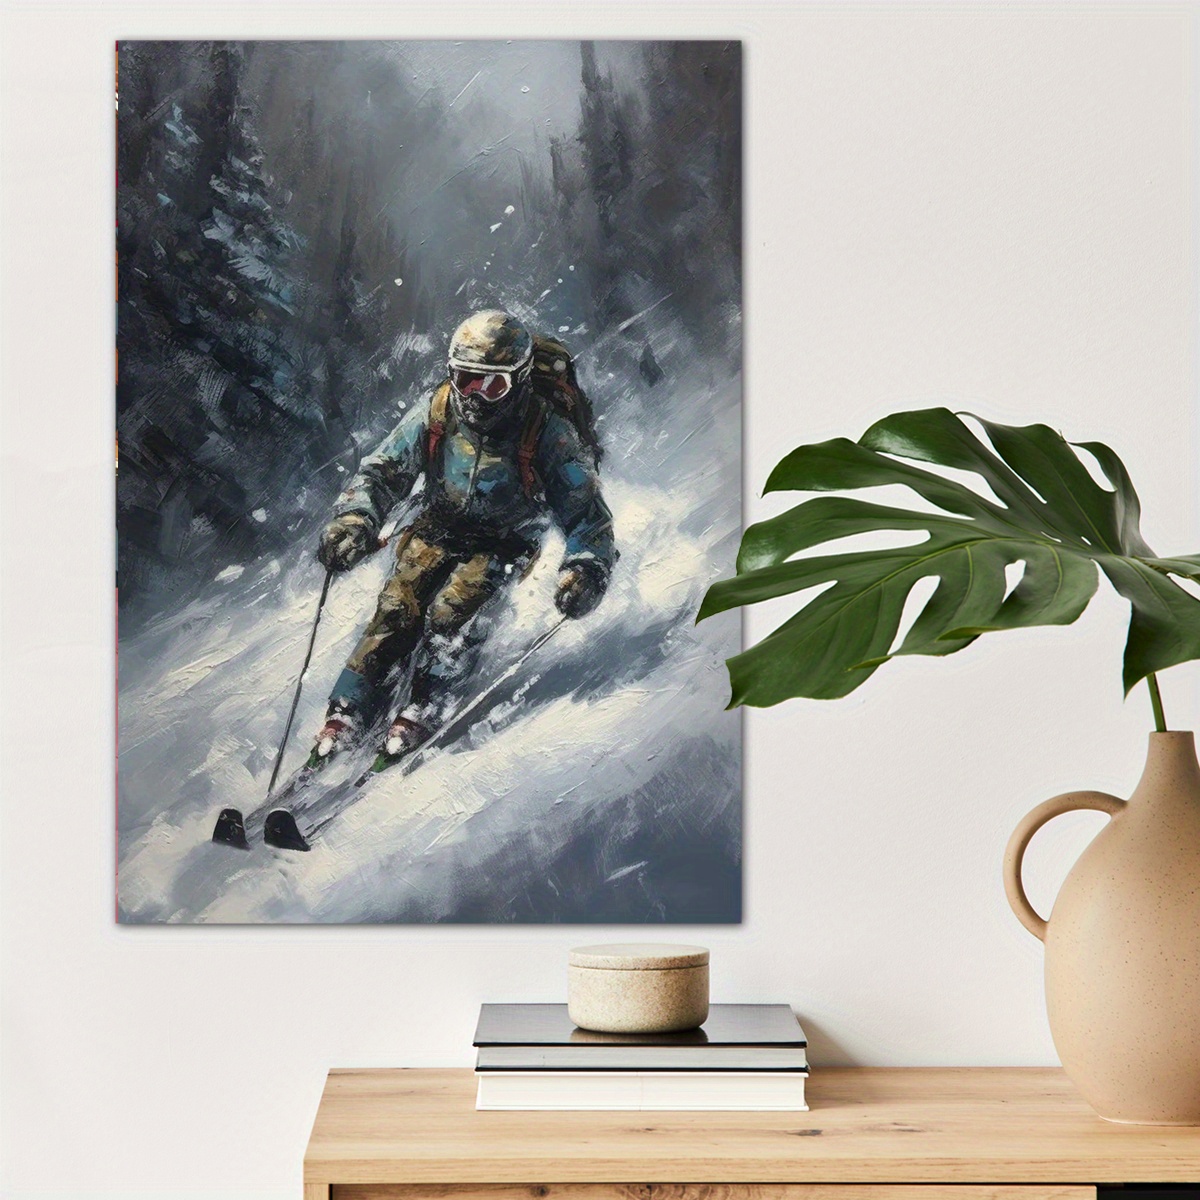 

1pc Skier Oil Painting Poster Canvas Wall Art For Home Decor, Sport Lovers Poster Wall Decor, High Quality Canvas Prints For Living Room Bedroom Kitchen Office Cafe Decor, Perfect Gift And Decoration